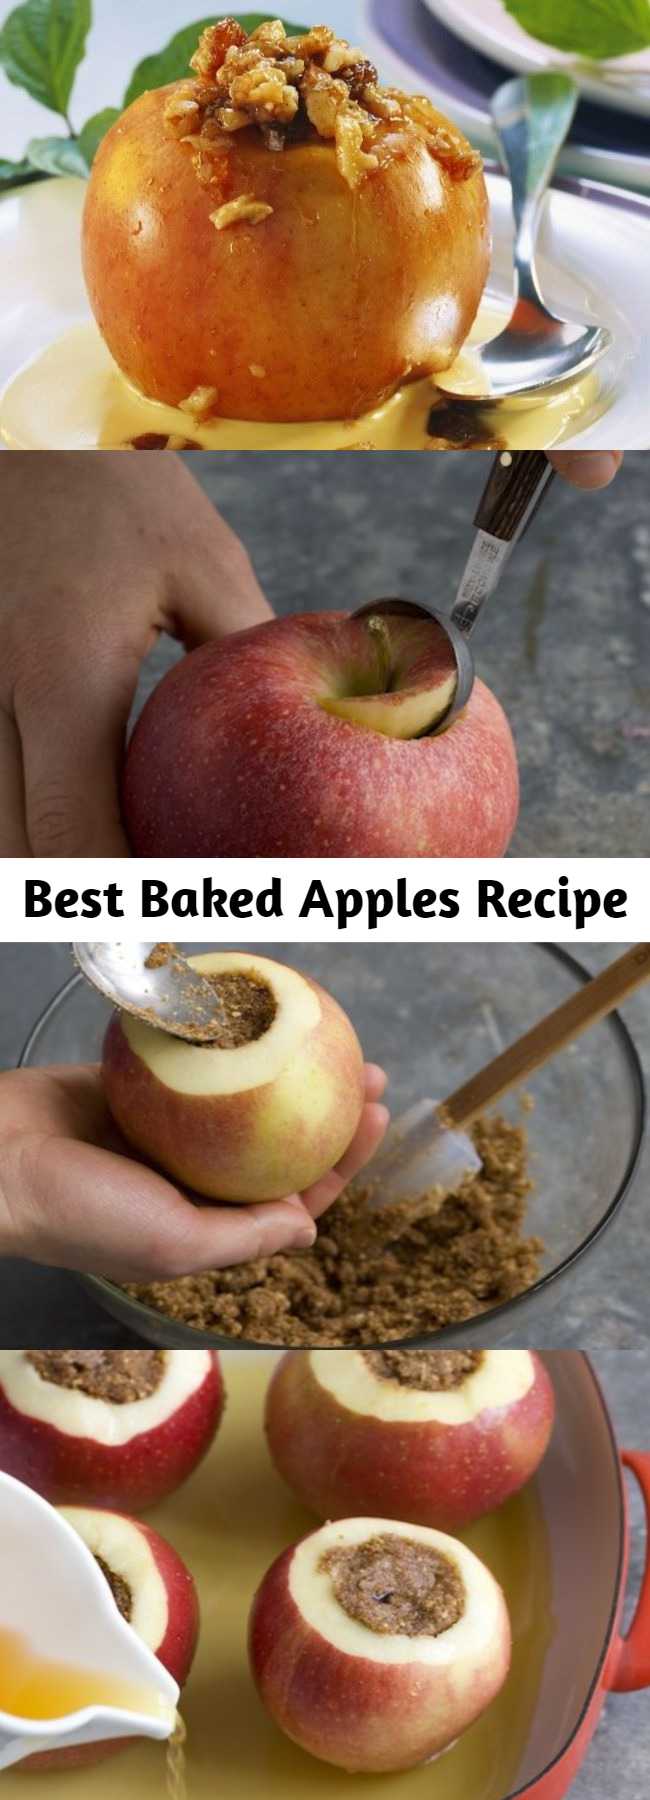 Best Baked Apples Recipe - Good warm or cold, they are a perfect make-ahead treat.